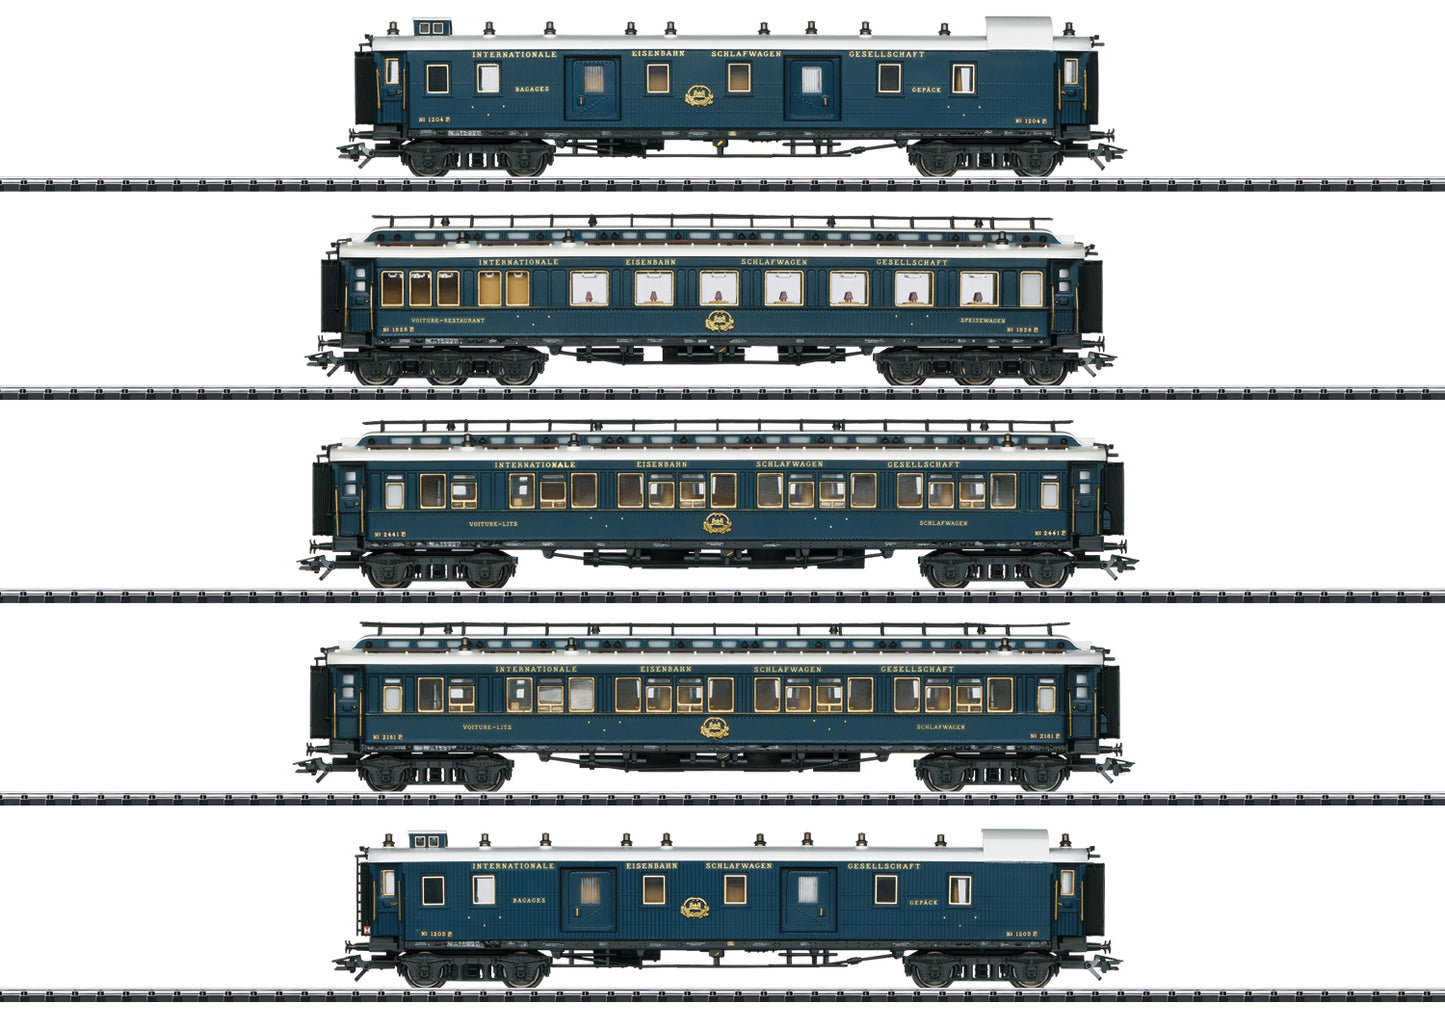 Trix 23219 - "Simplon Orient Express" Express Train Passenger Car Set 1 (Only with 23220 and 22913)